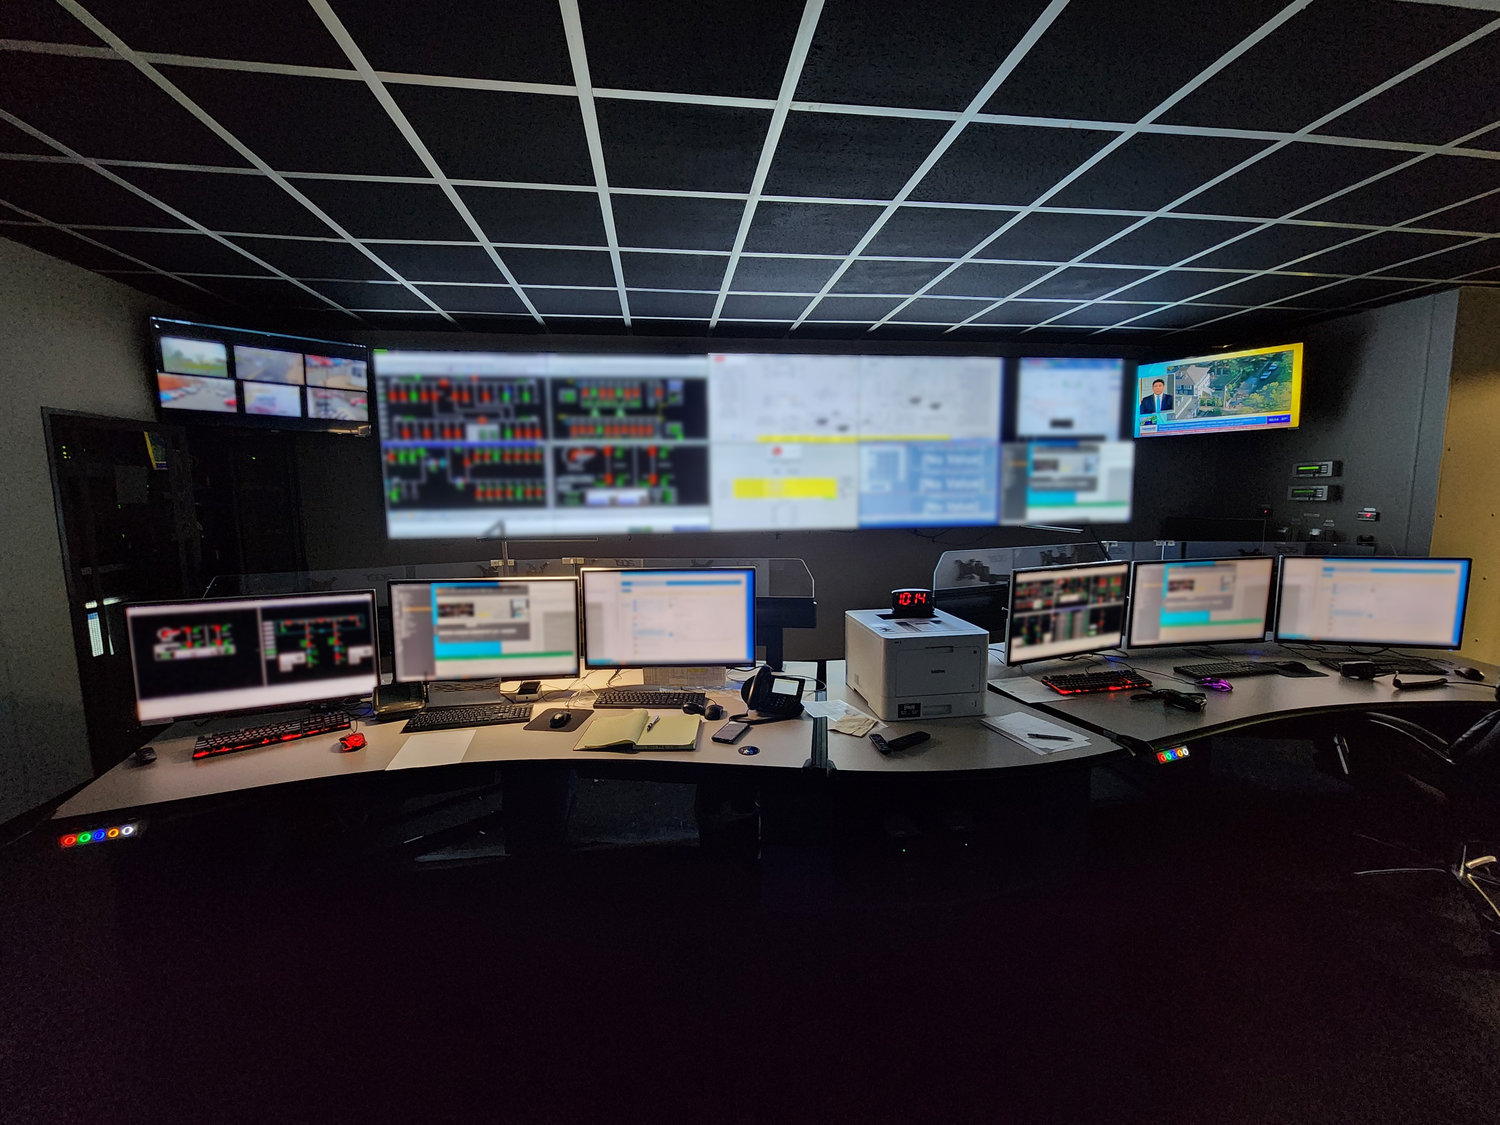 The nerve center of the village’s power grid has upgraded its control room, featuring a matrix system and video wall for improved monitoring and management for quicker response times.